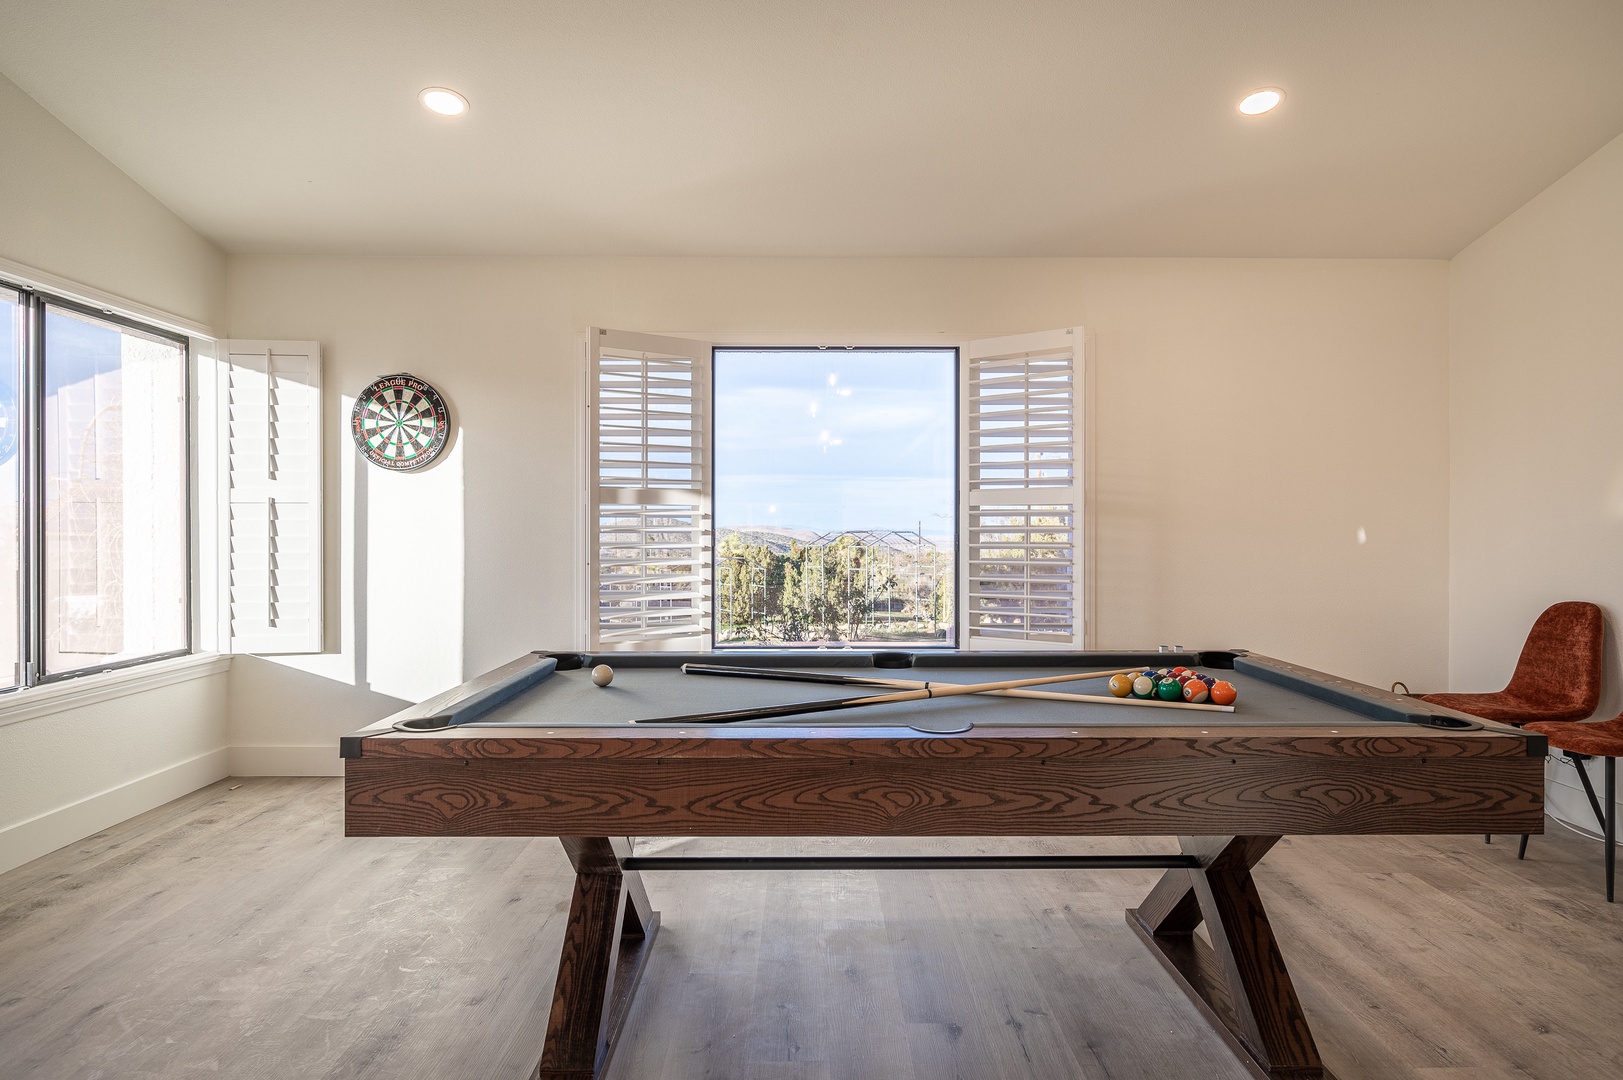 Game room with Pool table and TV